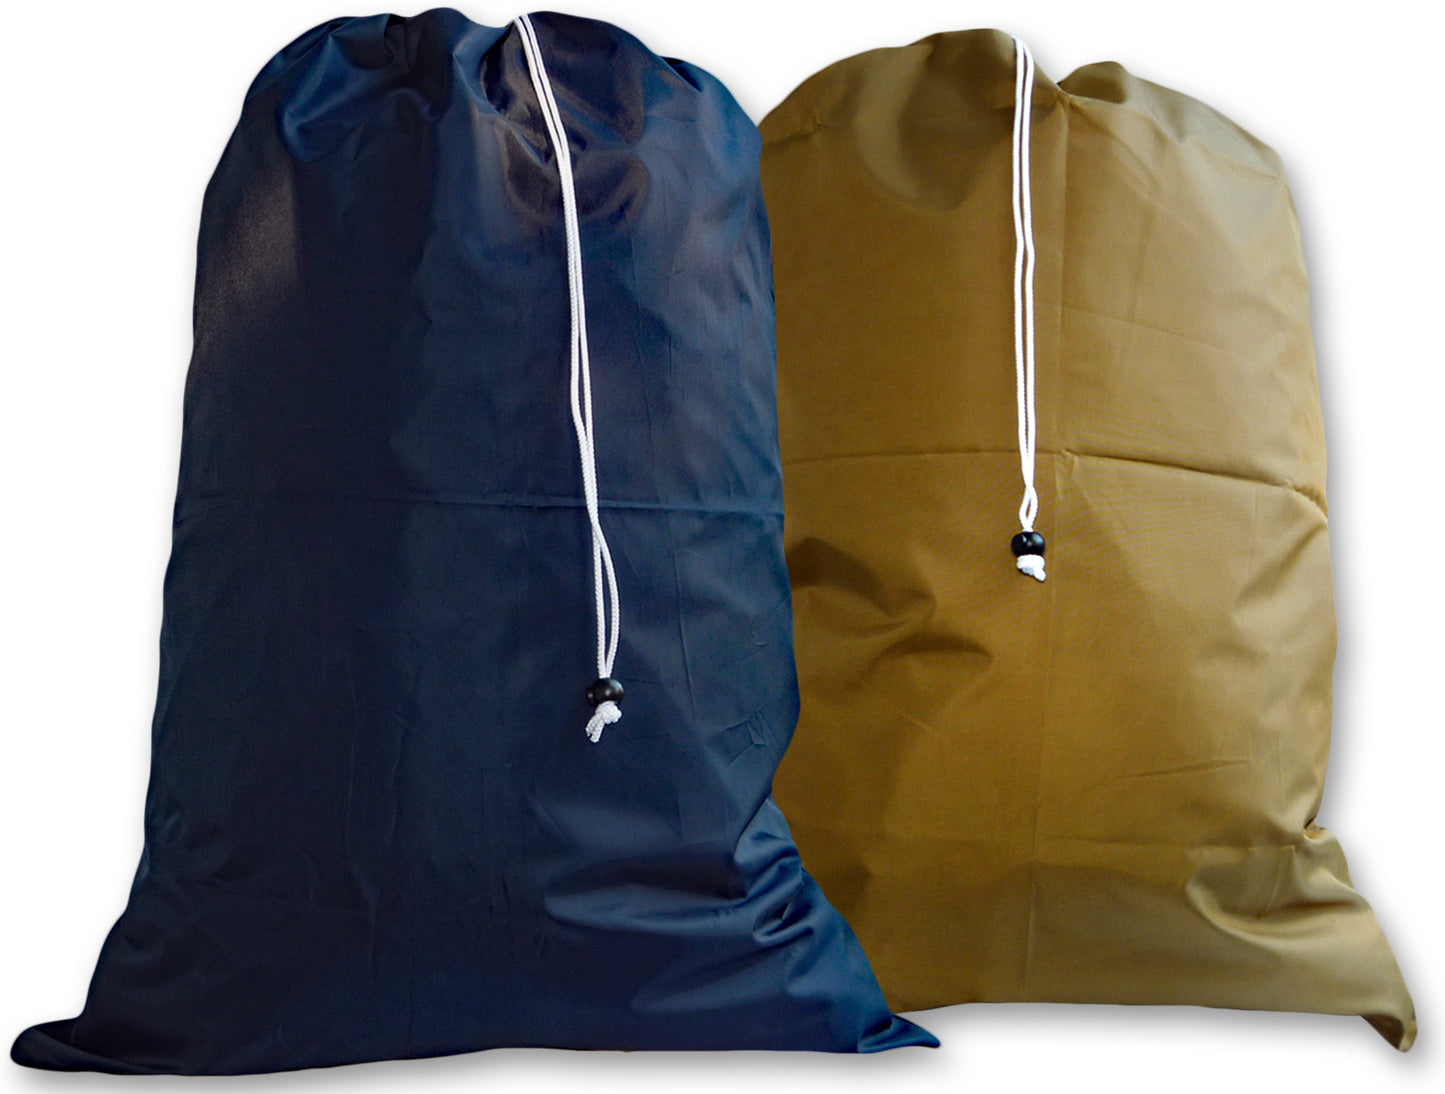 Extra Large Laundry Bags, Navy Blue, Gold, 2 Pack